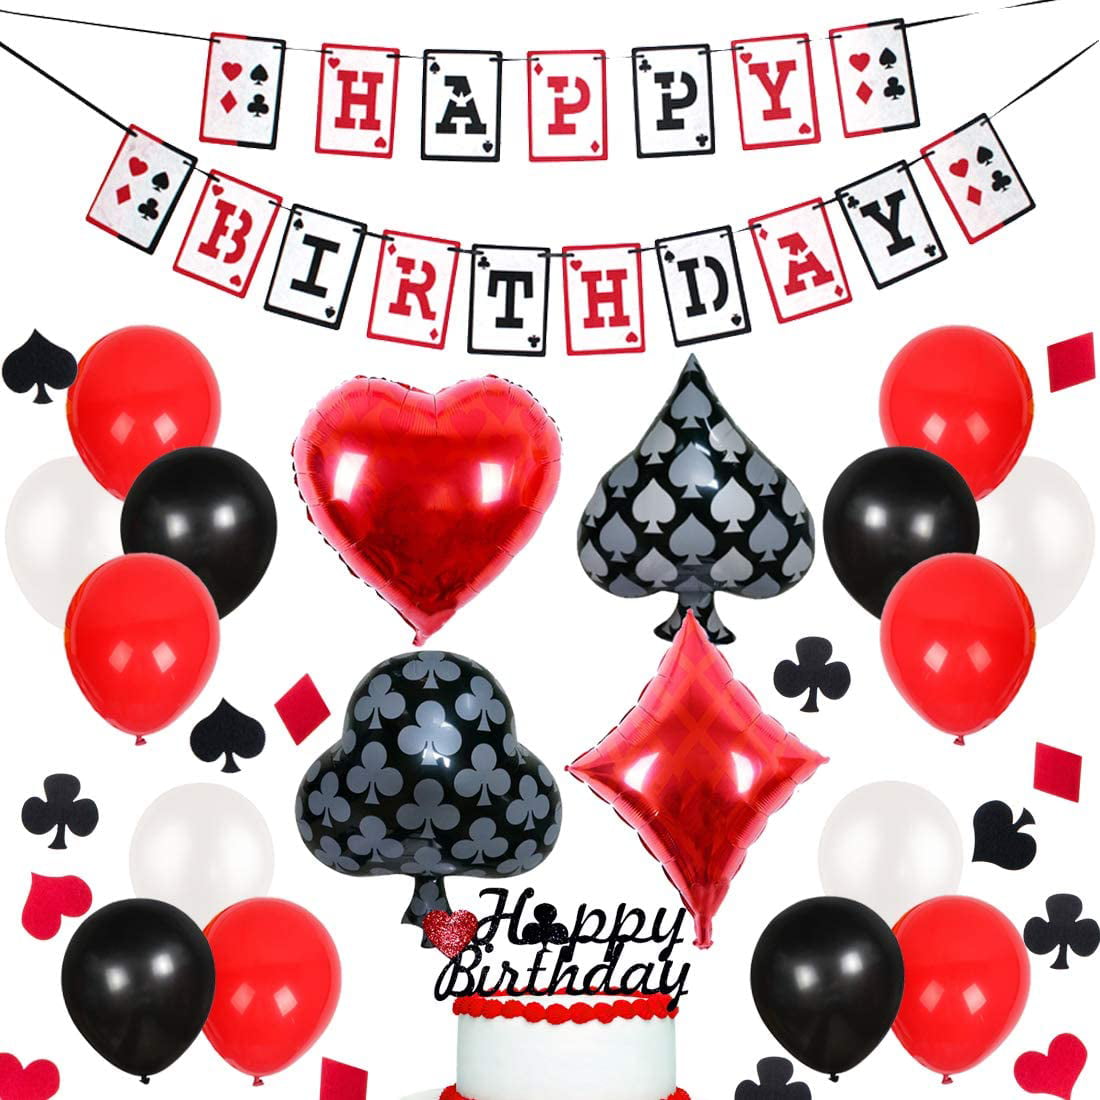 Poker Birthday Themed Party Supplies Decoration Colormoon Large Casino Birthday Party Banner Las Vegas Themed Birthday 9.8 x 1.5 ft 